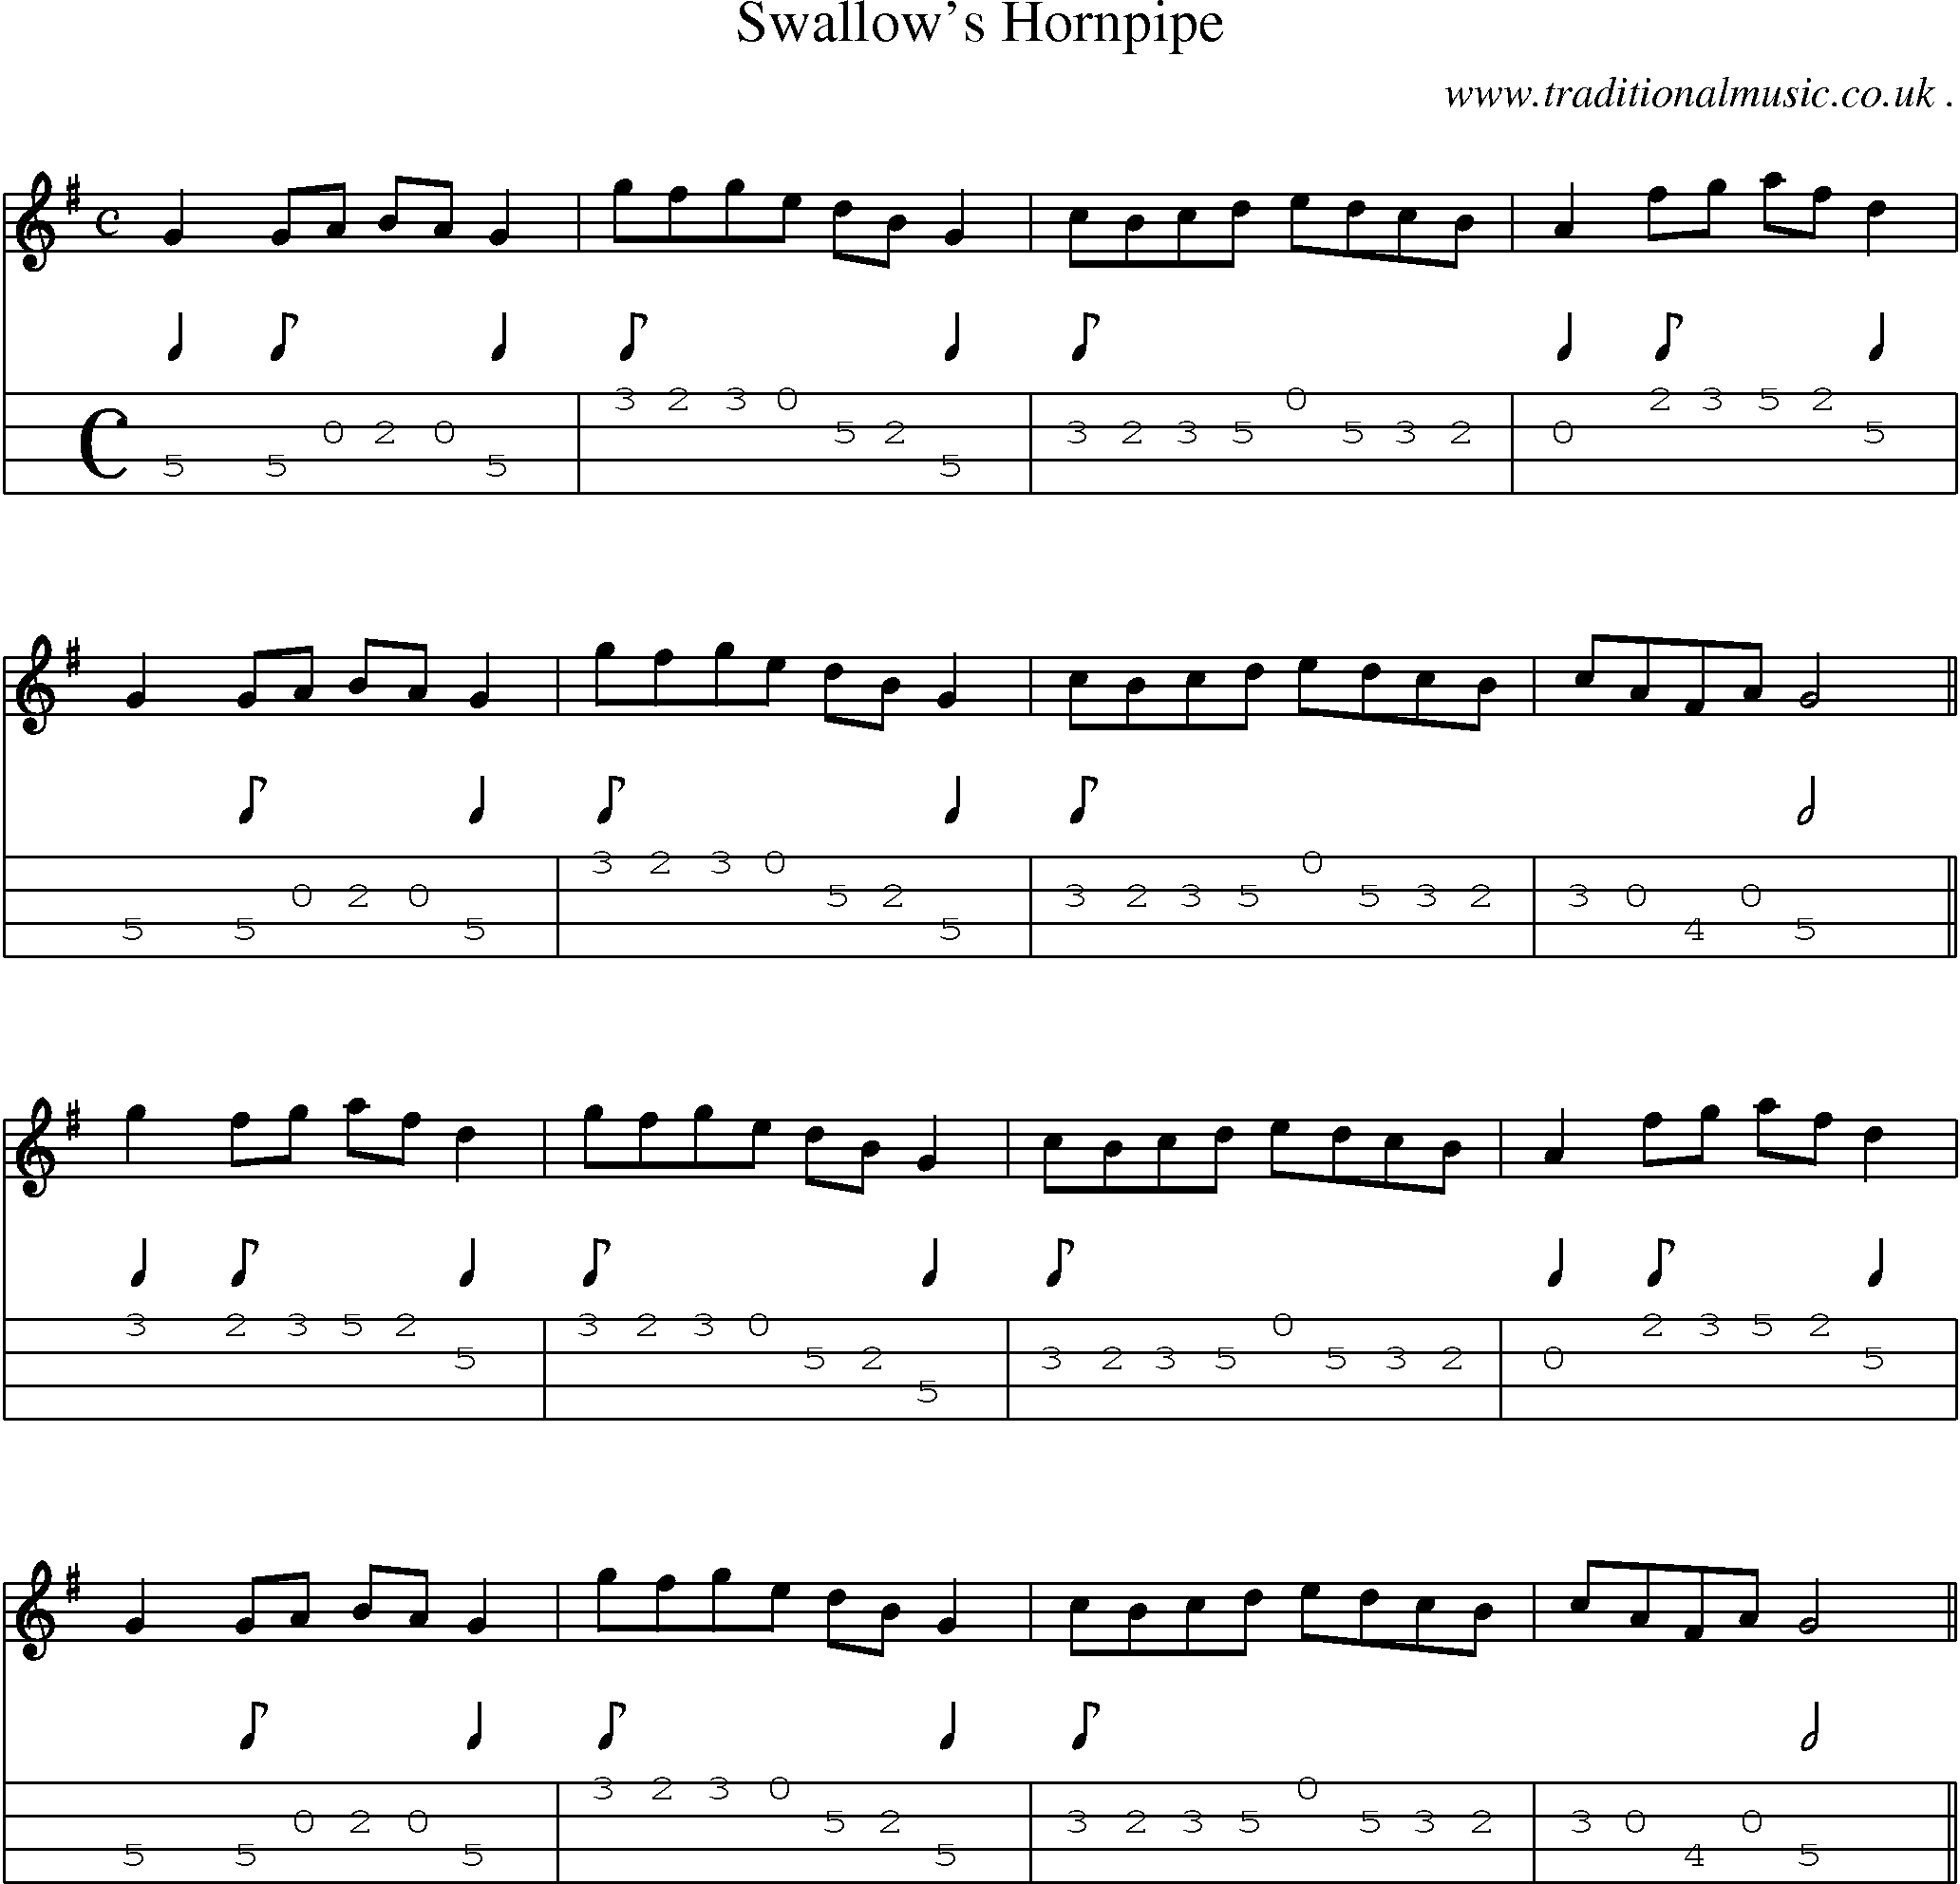 Sheet-Music and Mandolin Tabs for Swallows Hornpipe